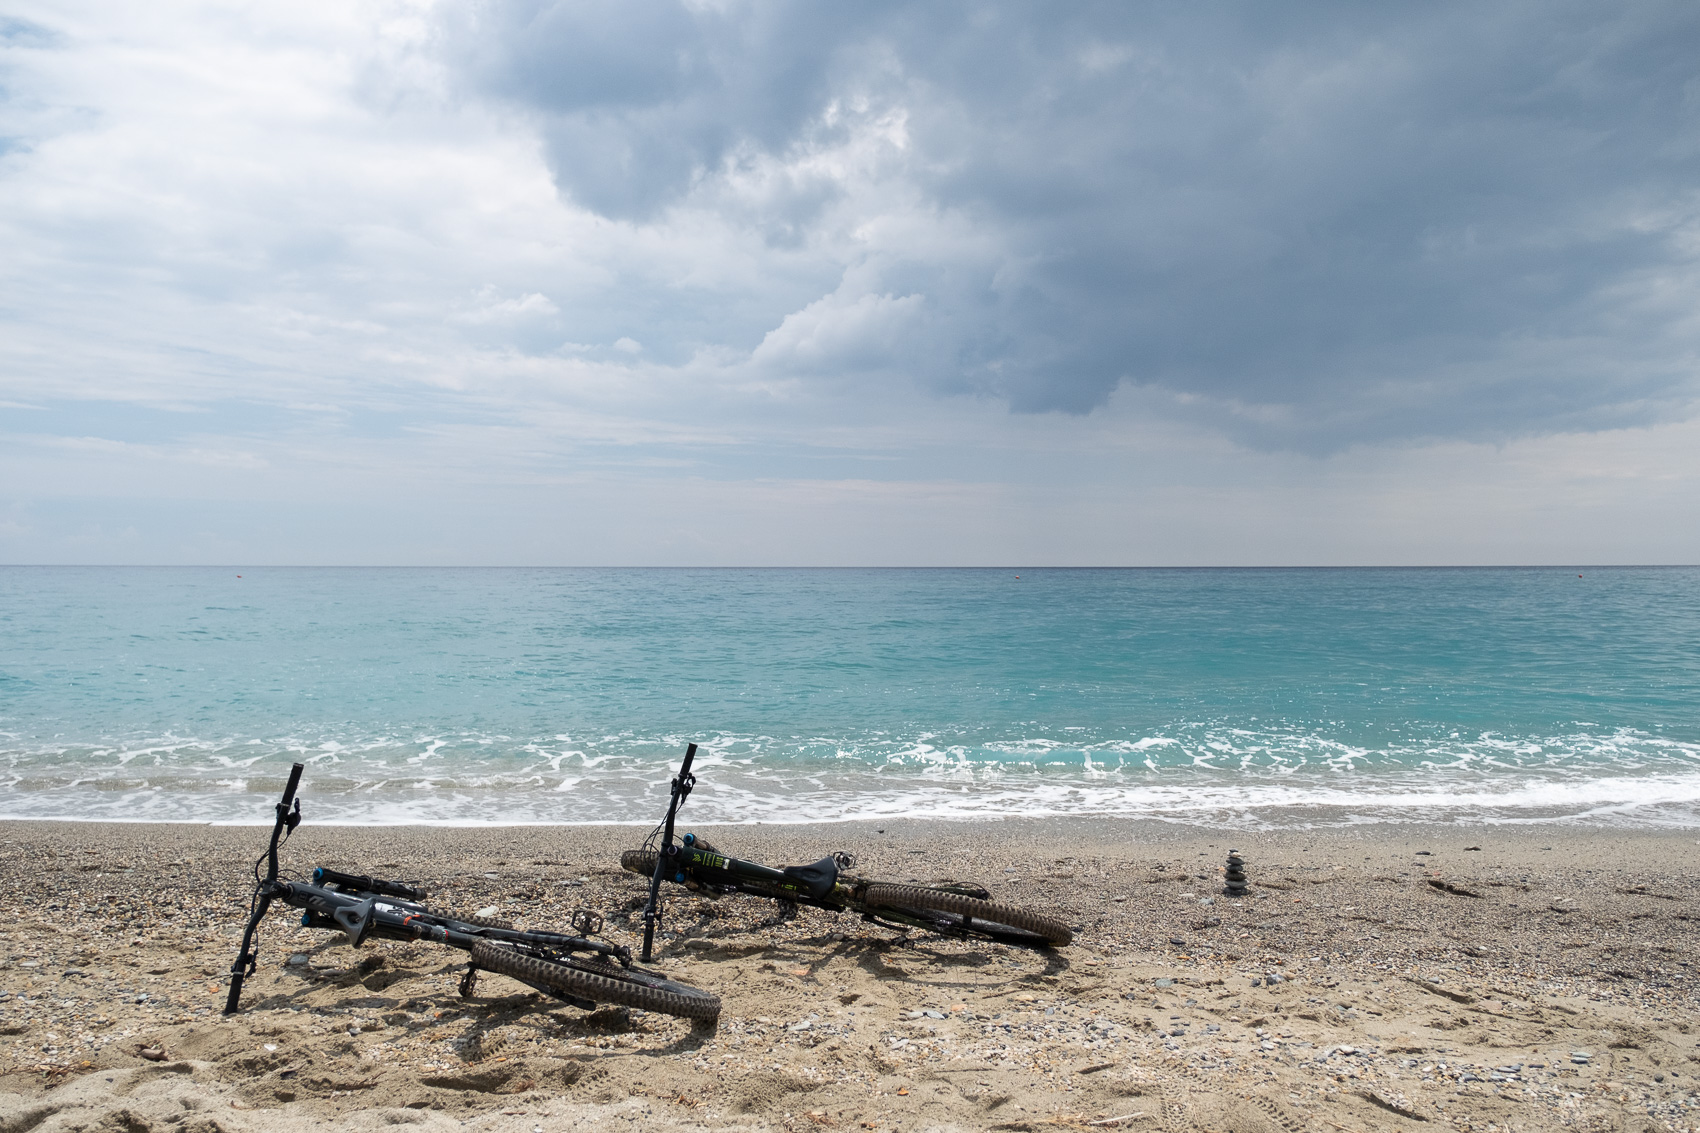 Bikes on the beach at Finale Ligure